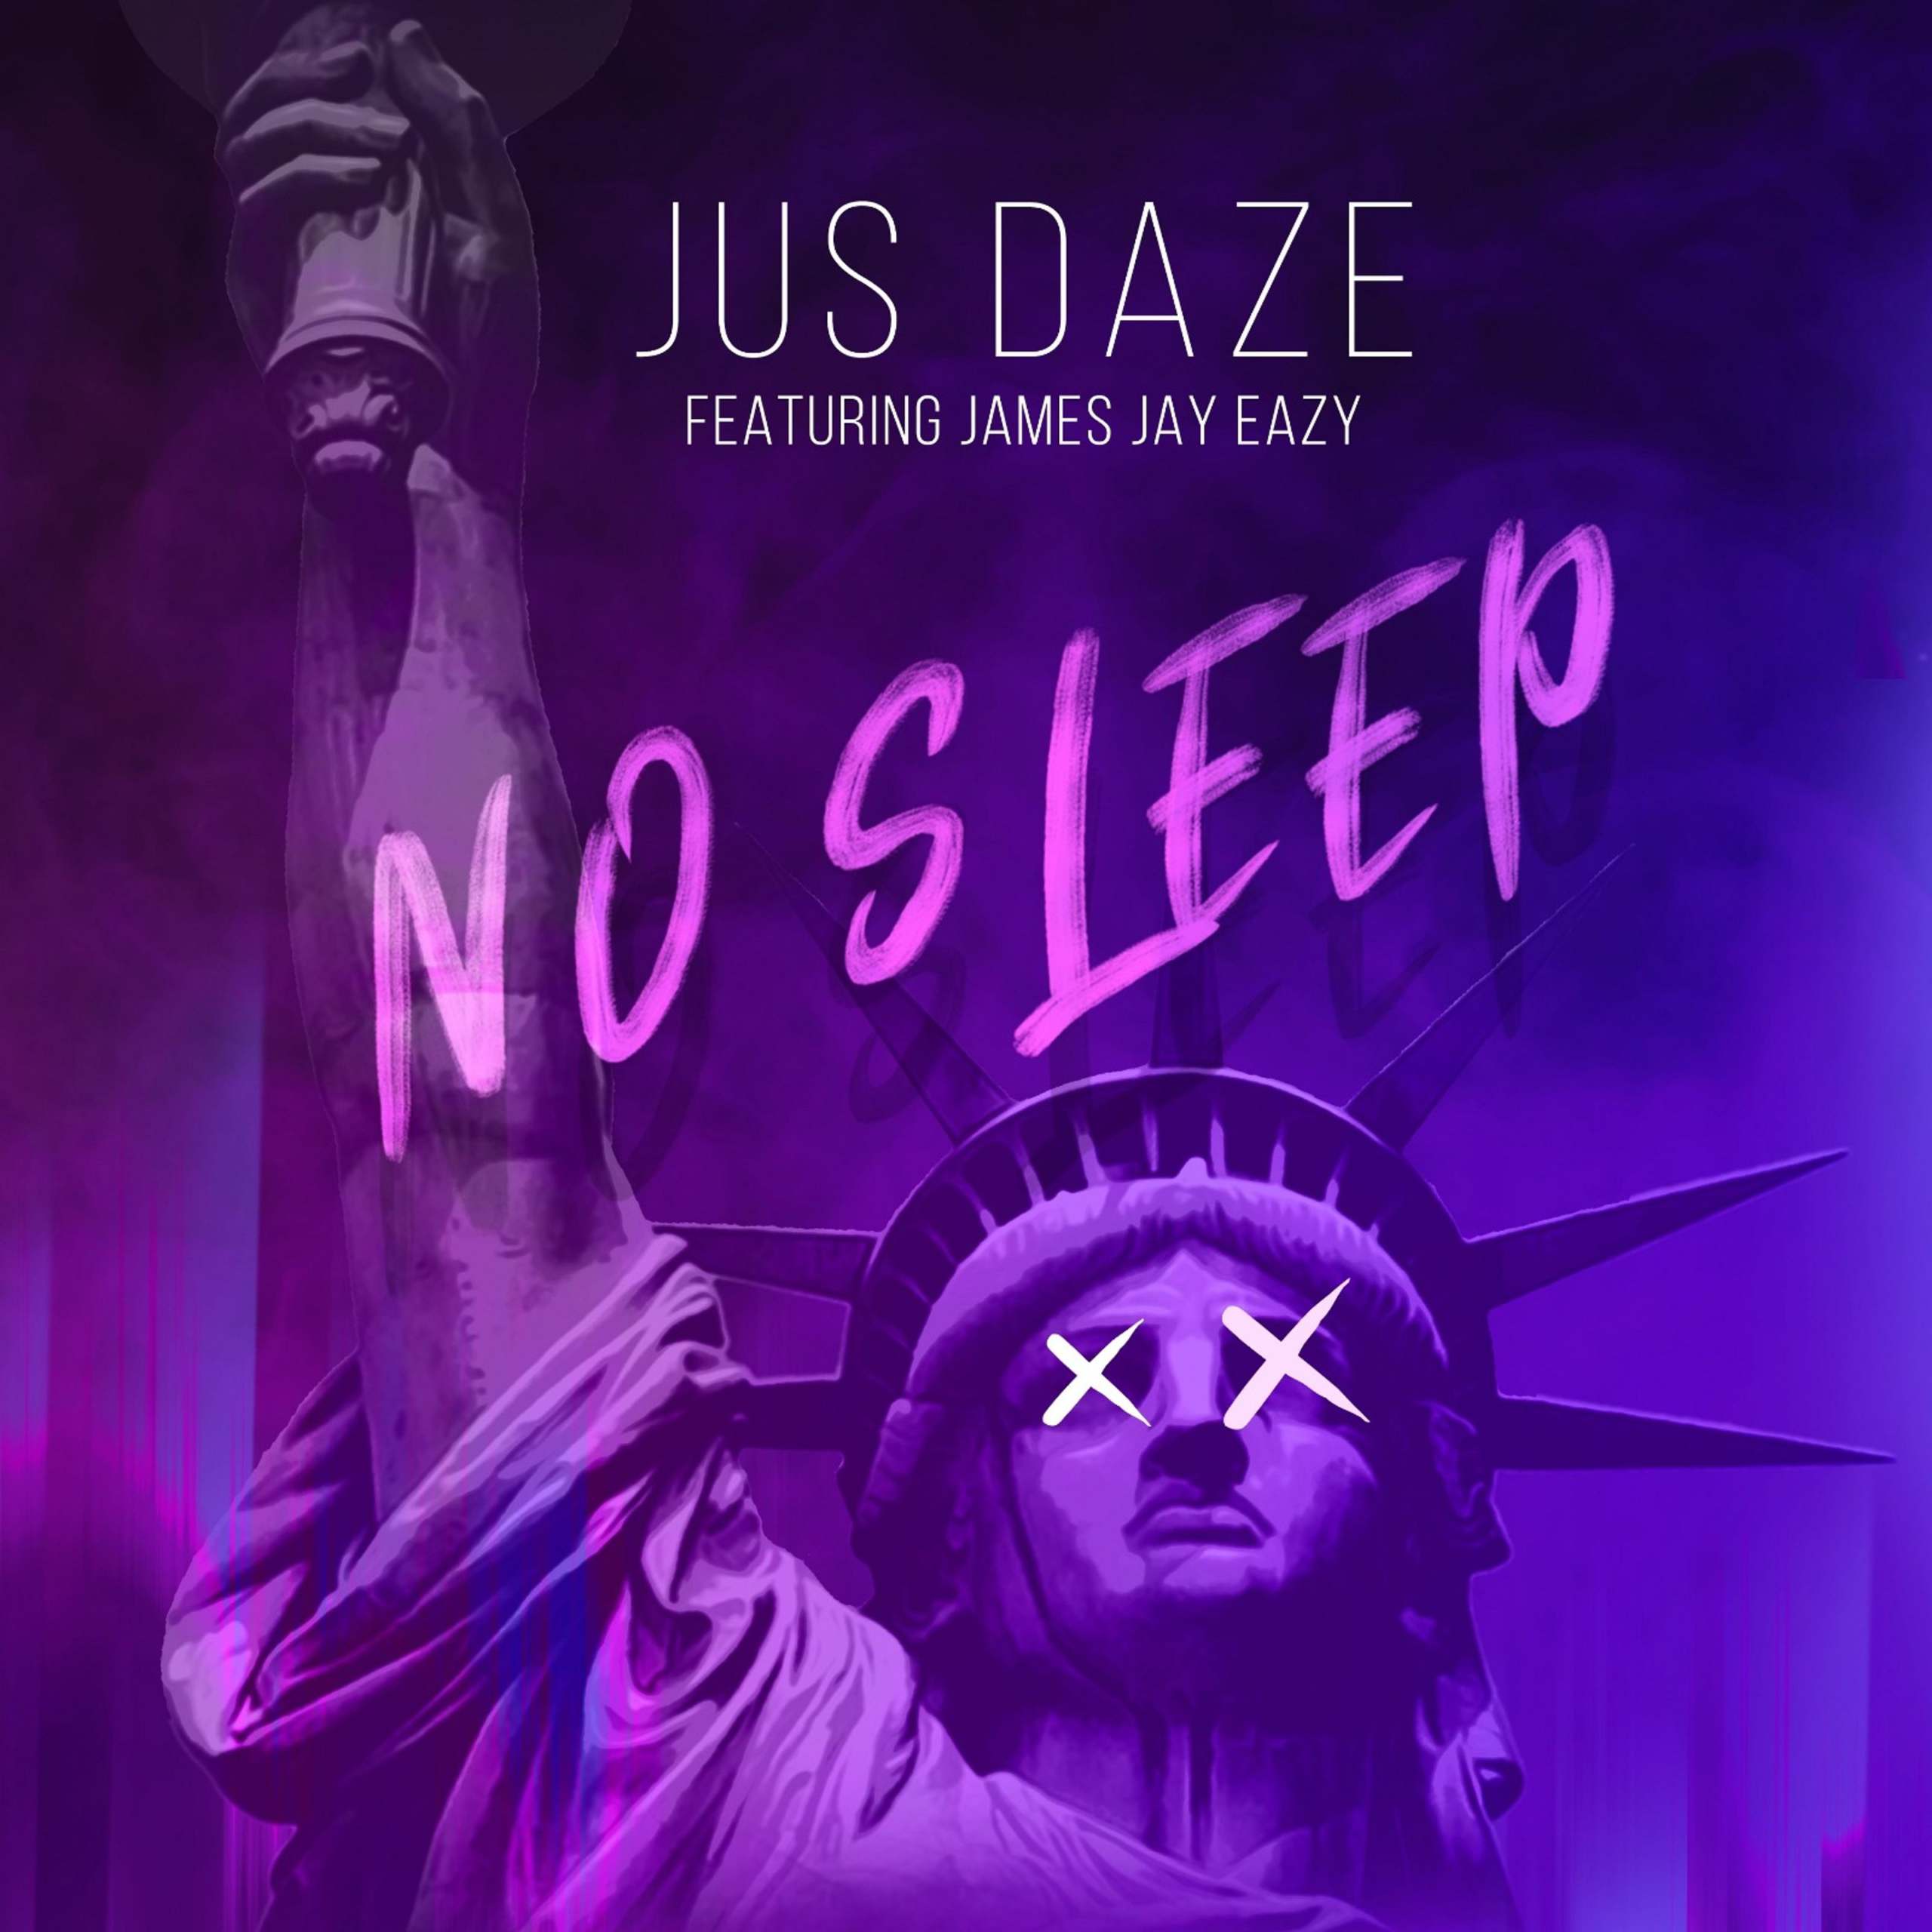 Watch The Lyric Video For Jus Daze's "No Sleep" feat. James Jay Eazy